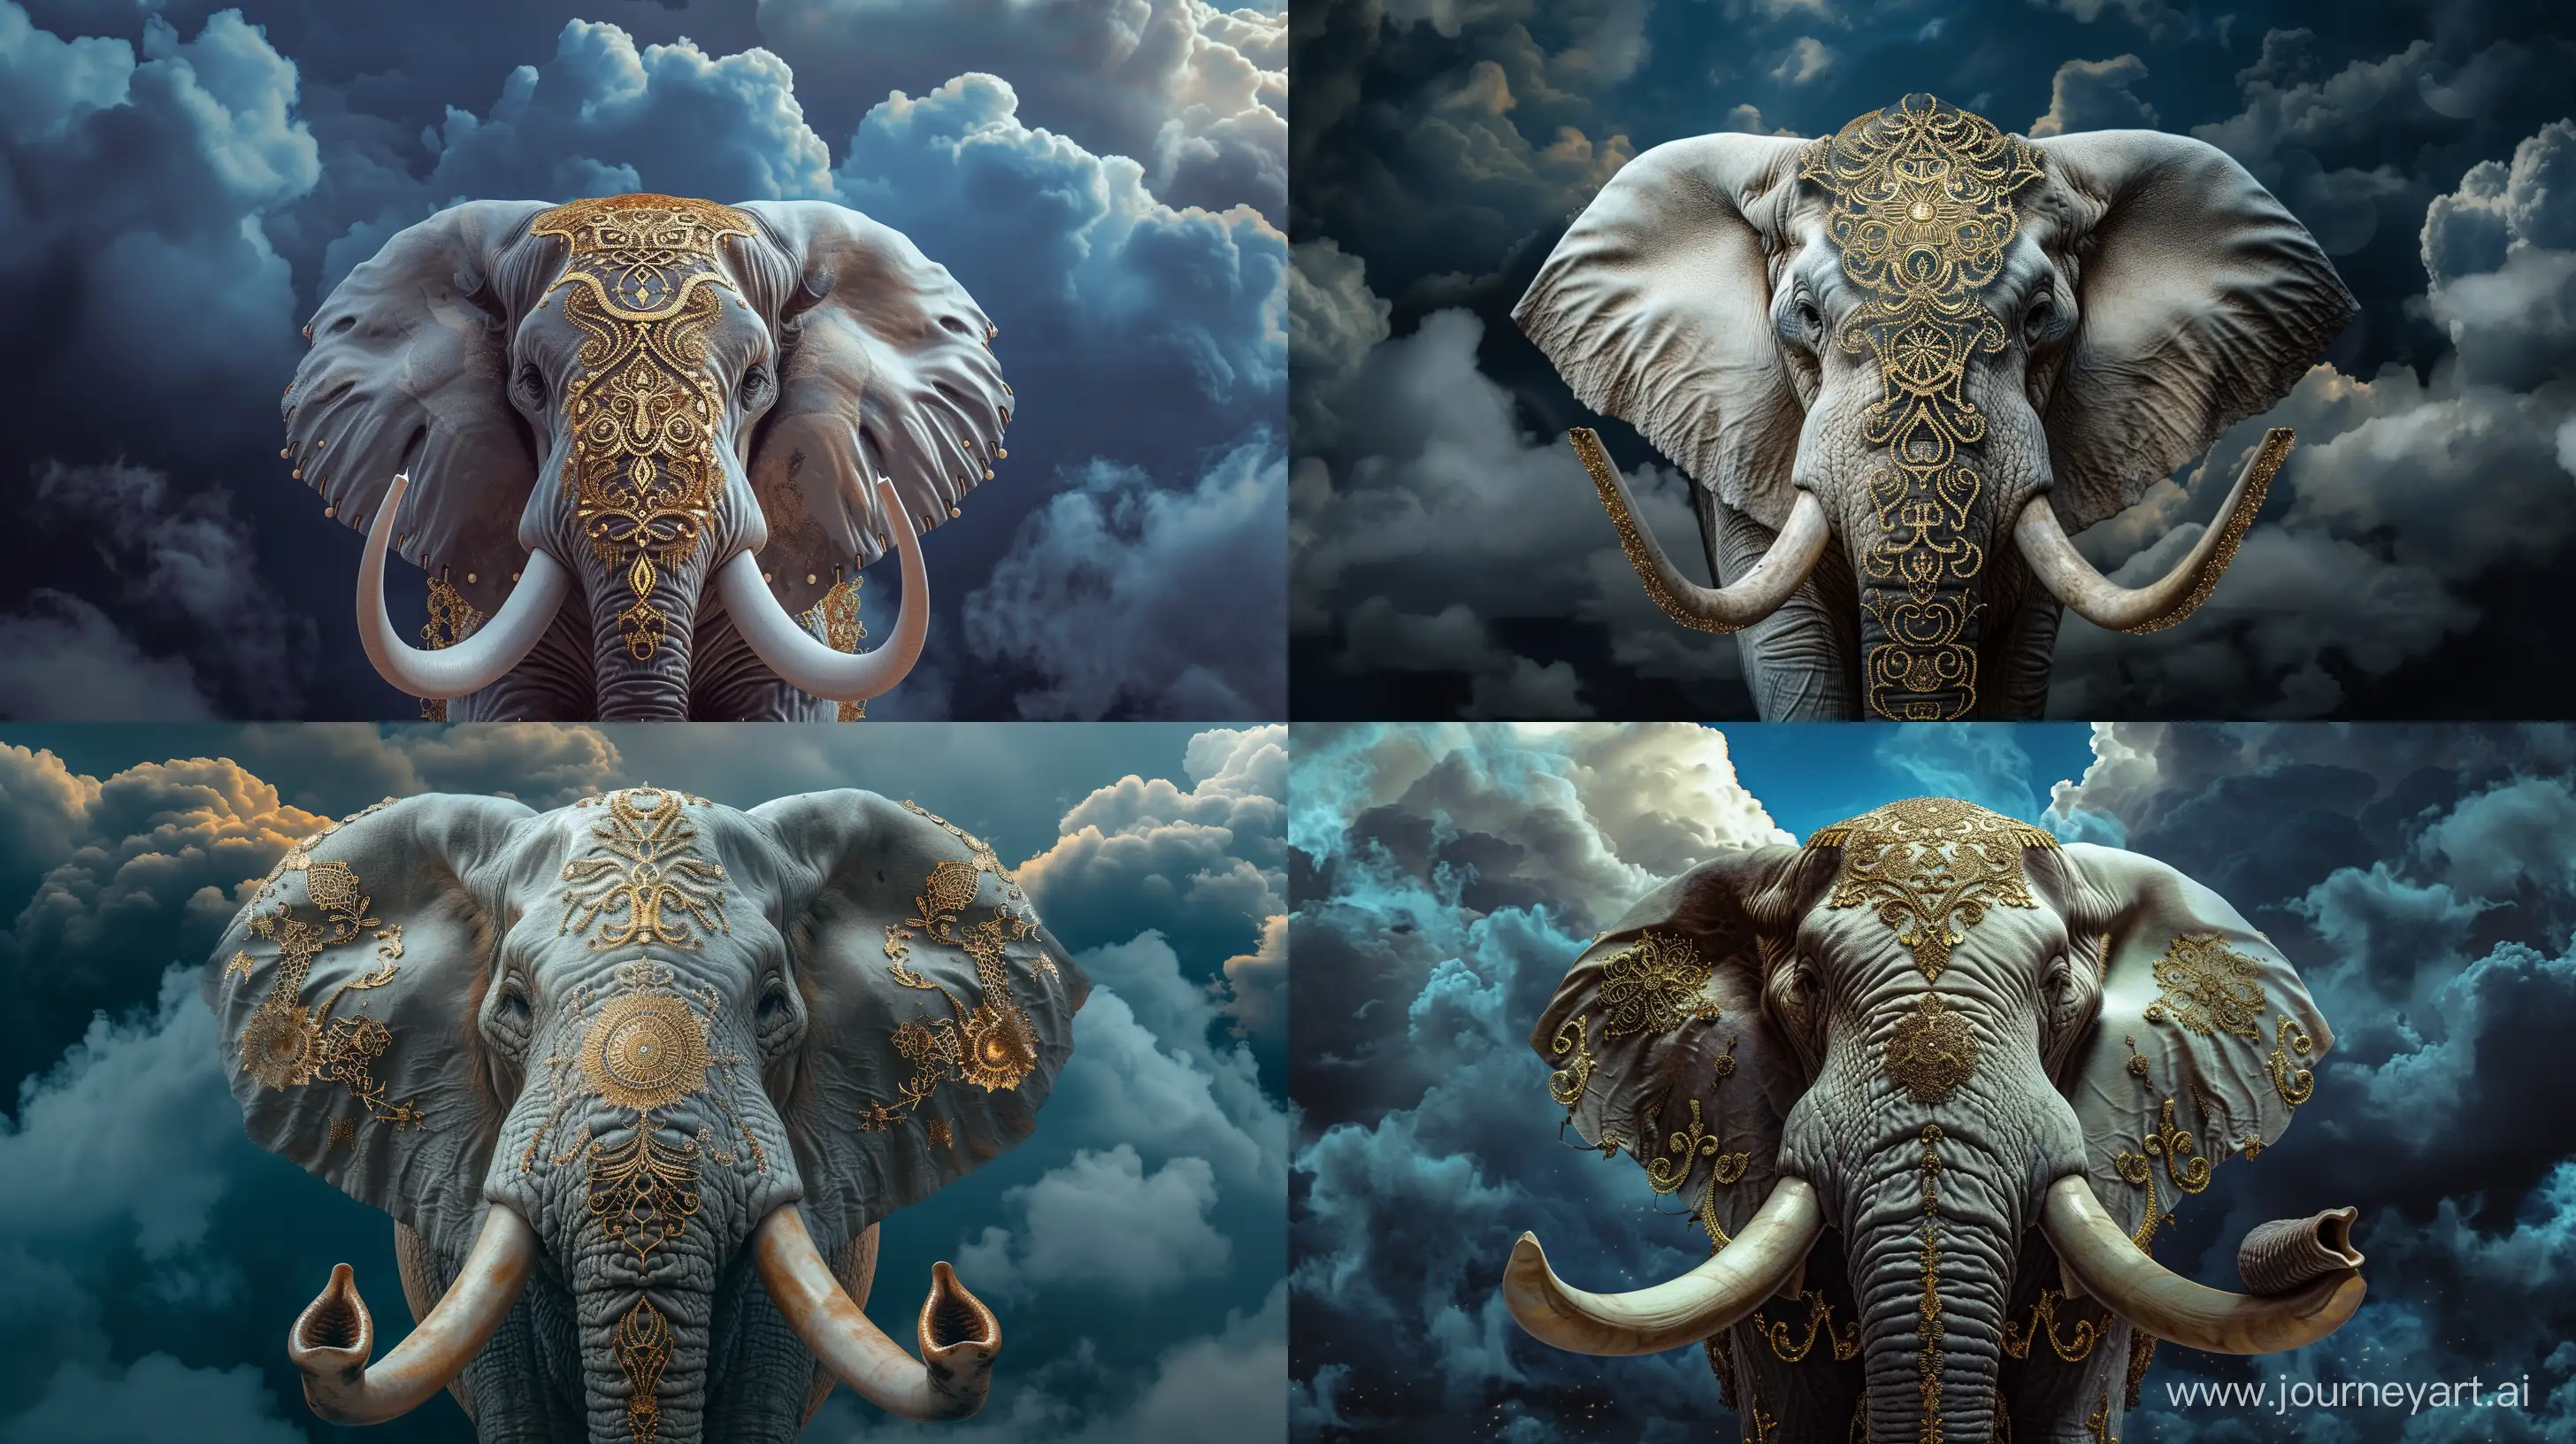 Divine-White-Elephant-with-Golden-Adornments-Against-Dramatic-Blue-Sky